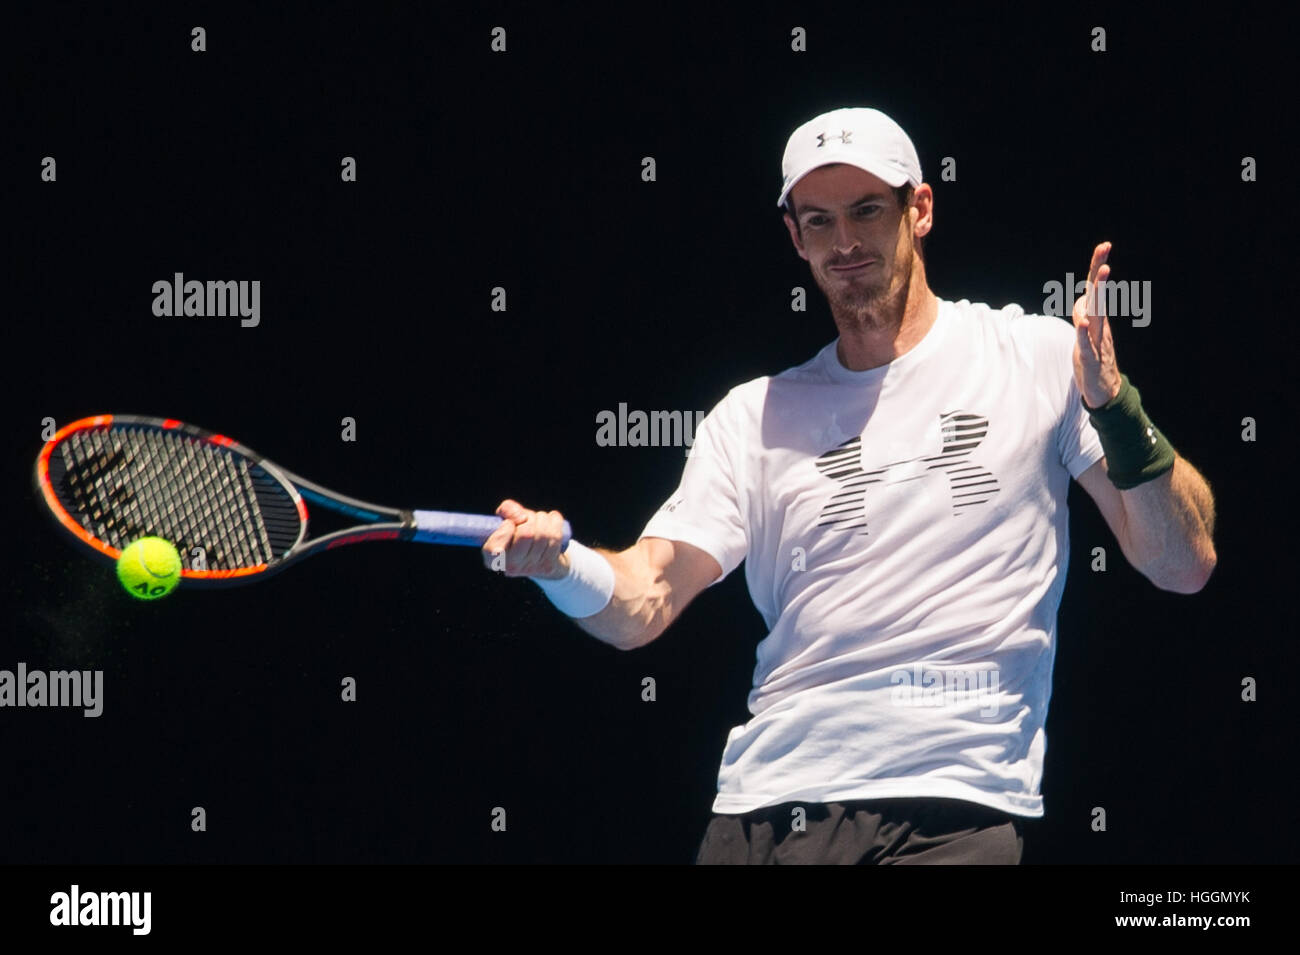 Melbourne, Australia. 10th Jan, 2017. Andy Murray of Great Britain attends a training session ahead of Australian Open 2017 at Melbourne Park in Melbourne, Australia. The Australian Open 2017 will take place at Melbourne Park from Jan. 16 to Jan. 29. © Bai Xue/Xinhua/Alamy Live News Stock Photo